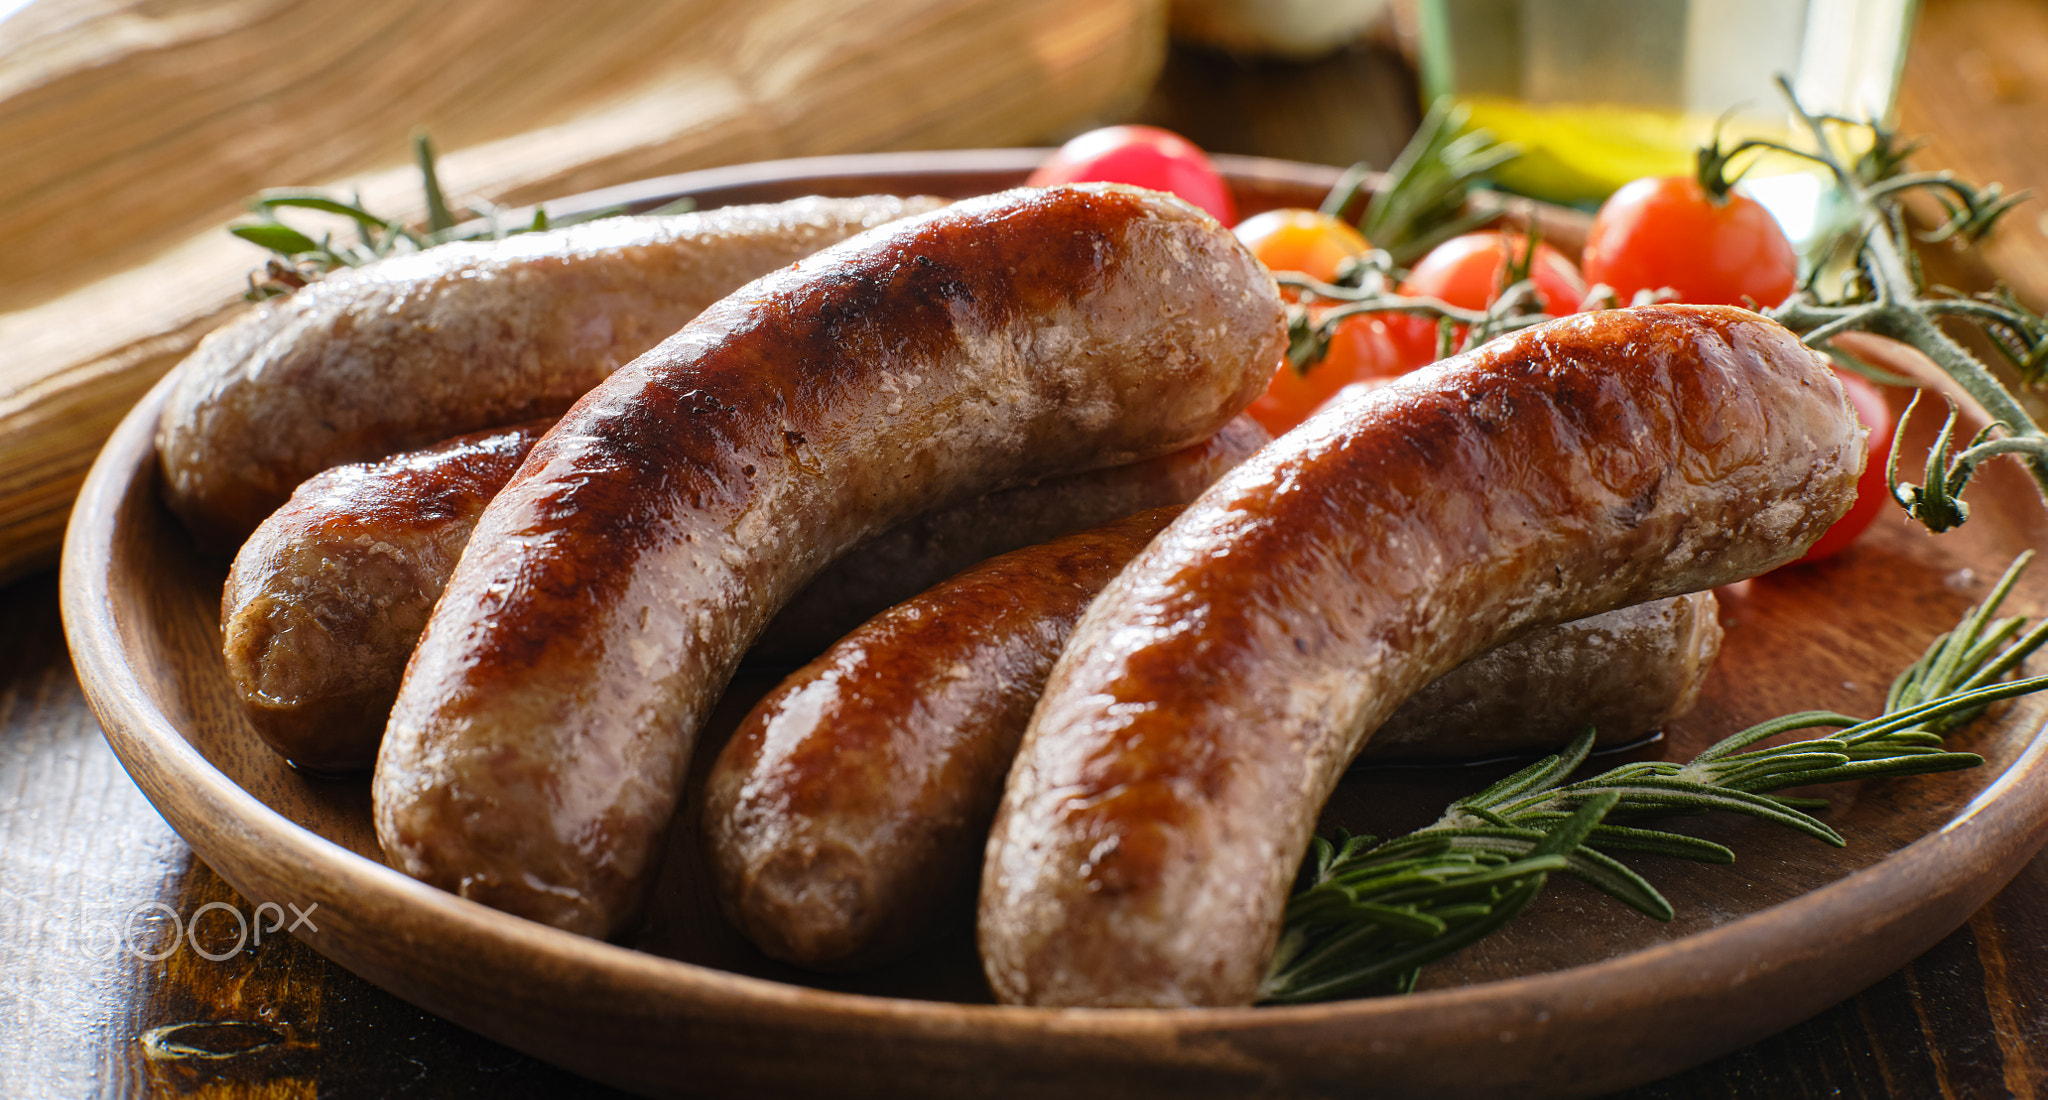 plate of german bratwurst sausages with herbs